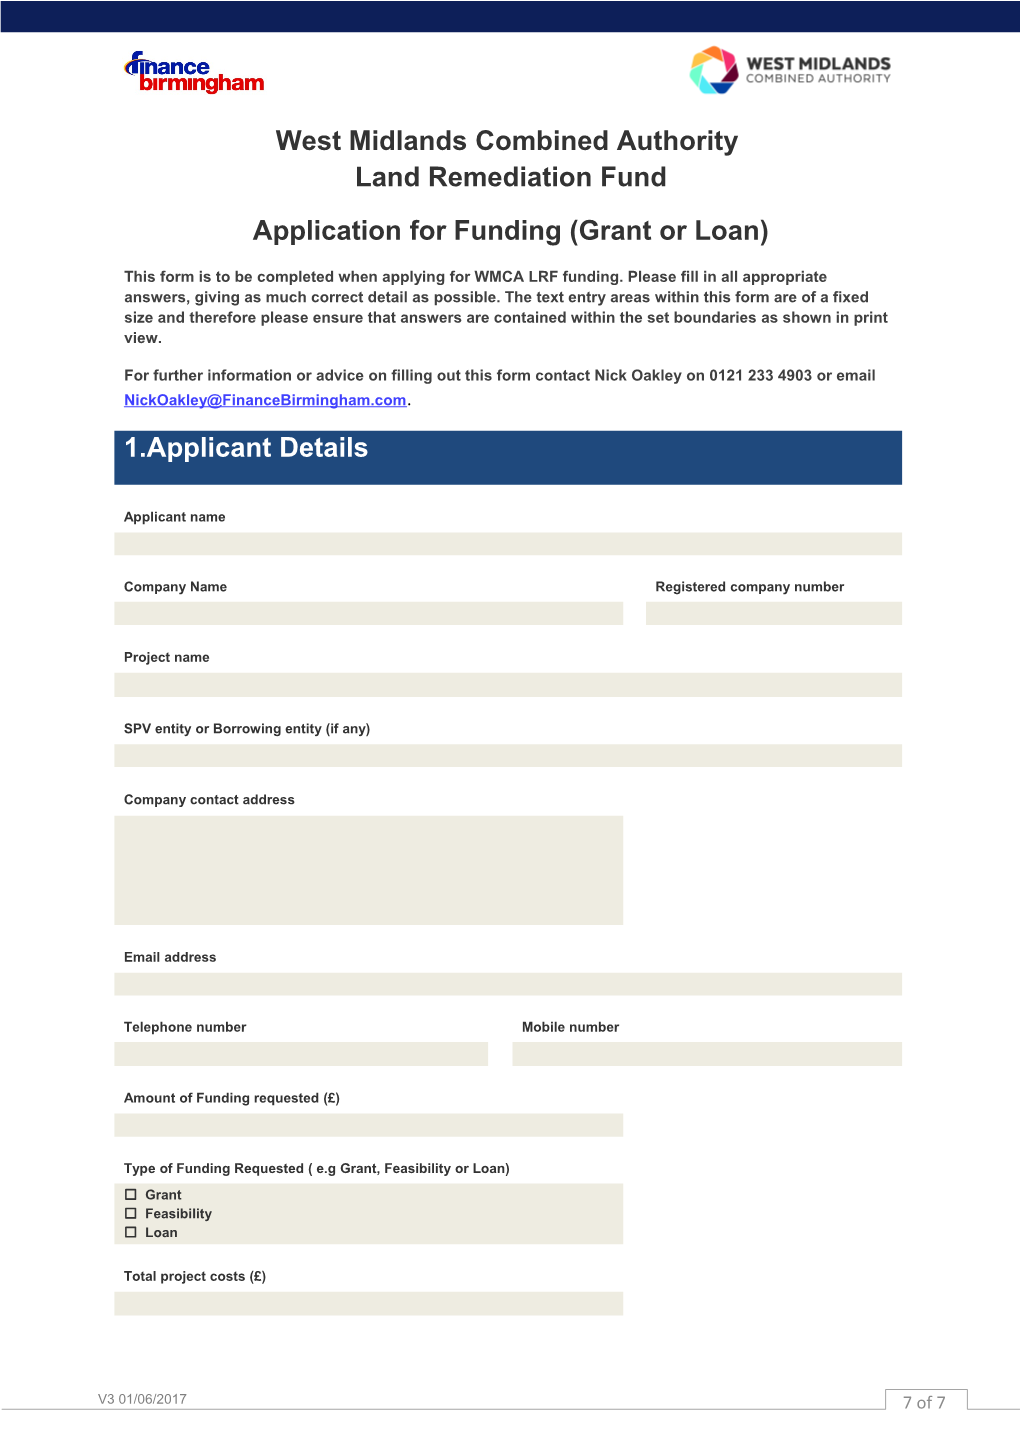 Application for Funding (Grant Or Loan)